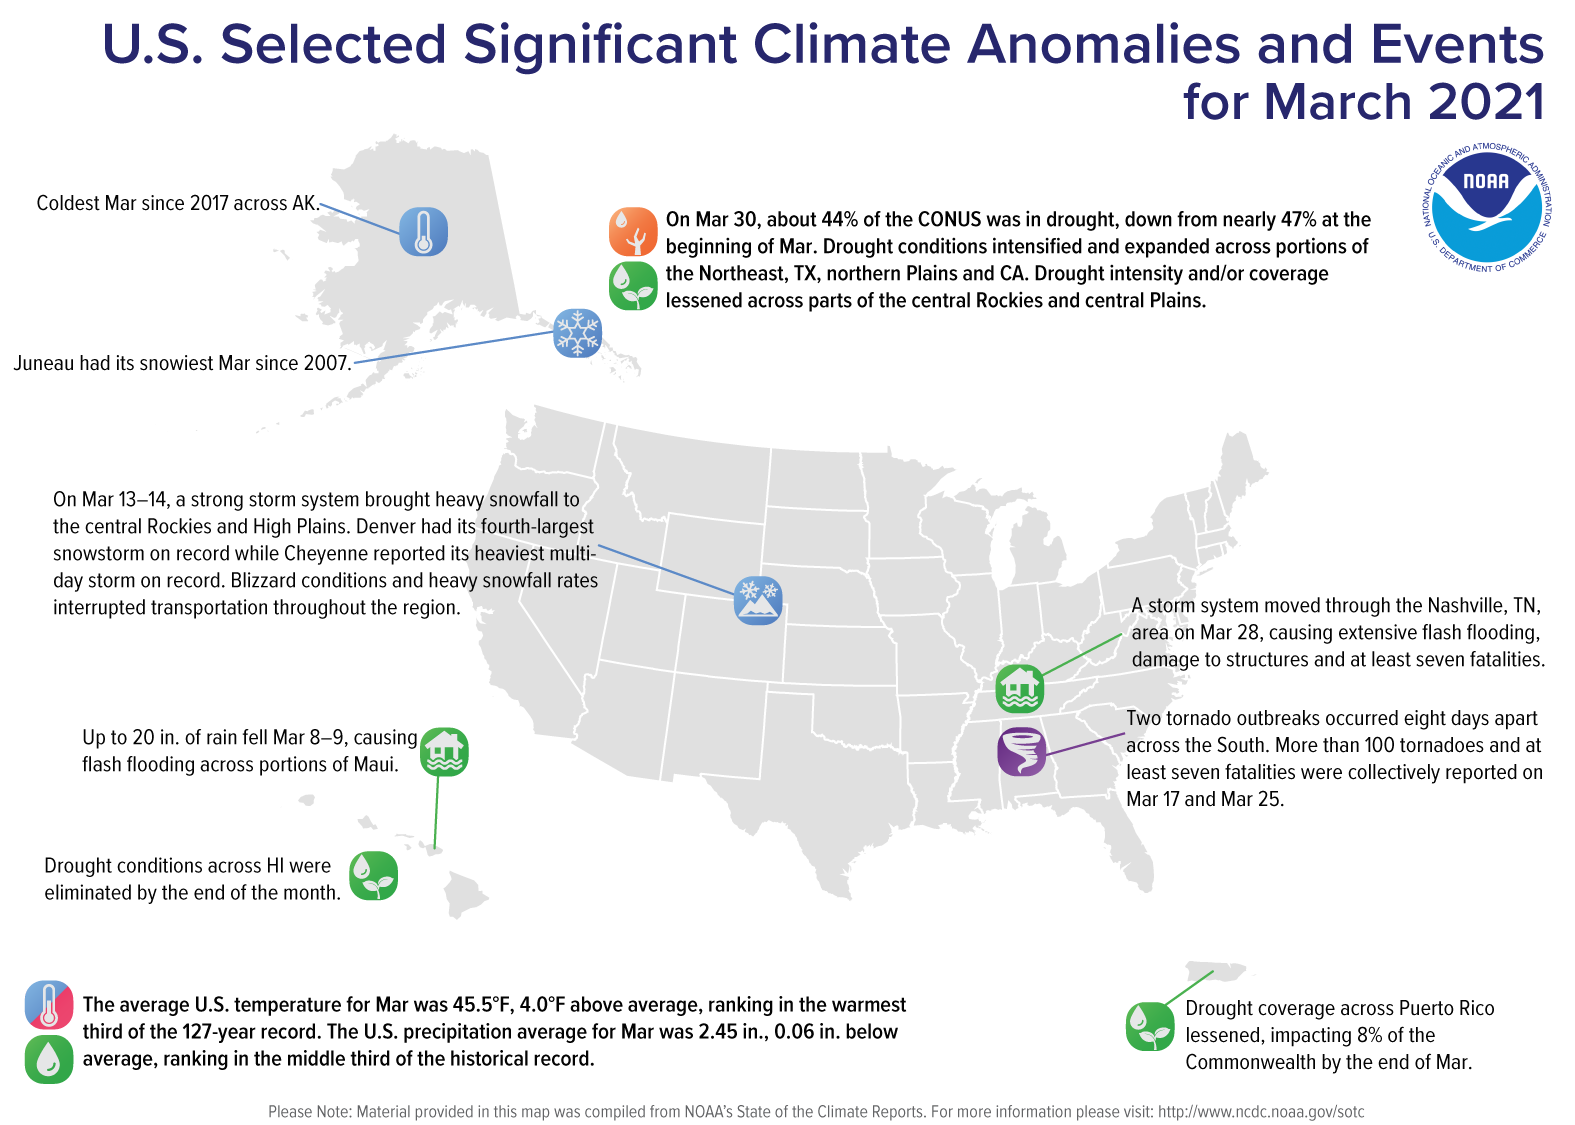 A map of the United States plotted with significant climate events that occurred during March 2021. Please see article text below as well as the full climate report highlights at http://bit.ly/USClimate202103.